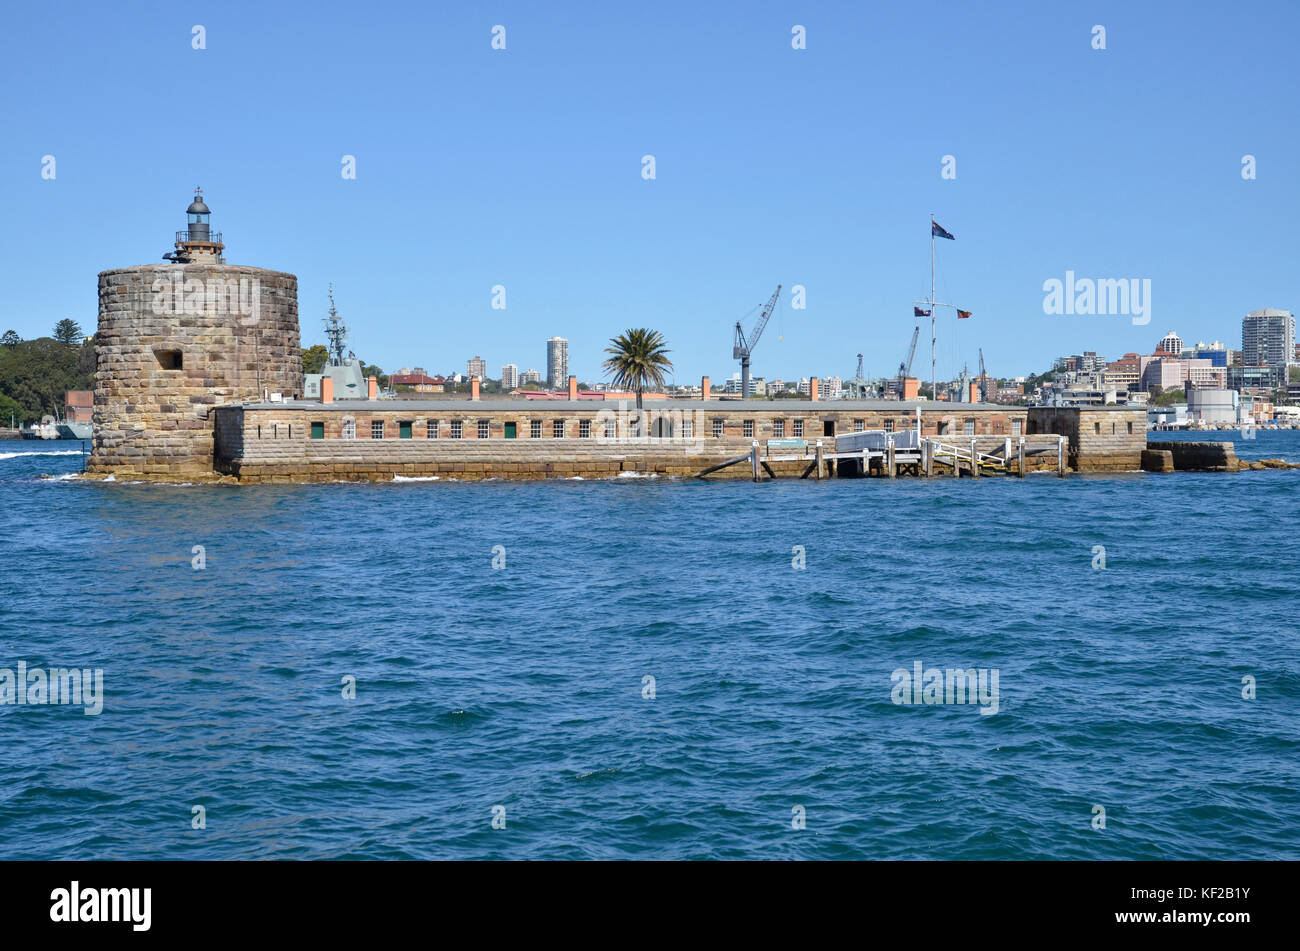 The former military fortress of Fort Denison in Sydney Harbour. Stock Photo